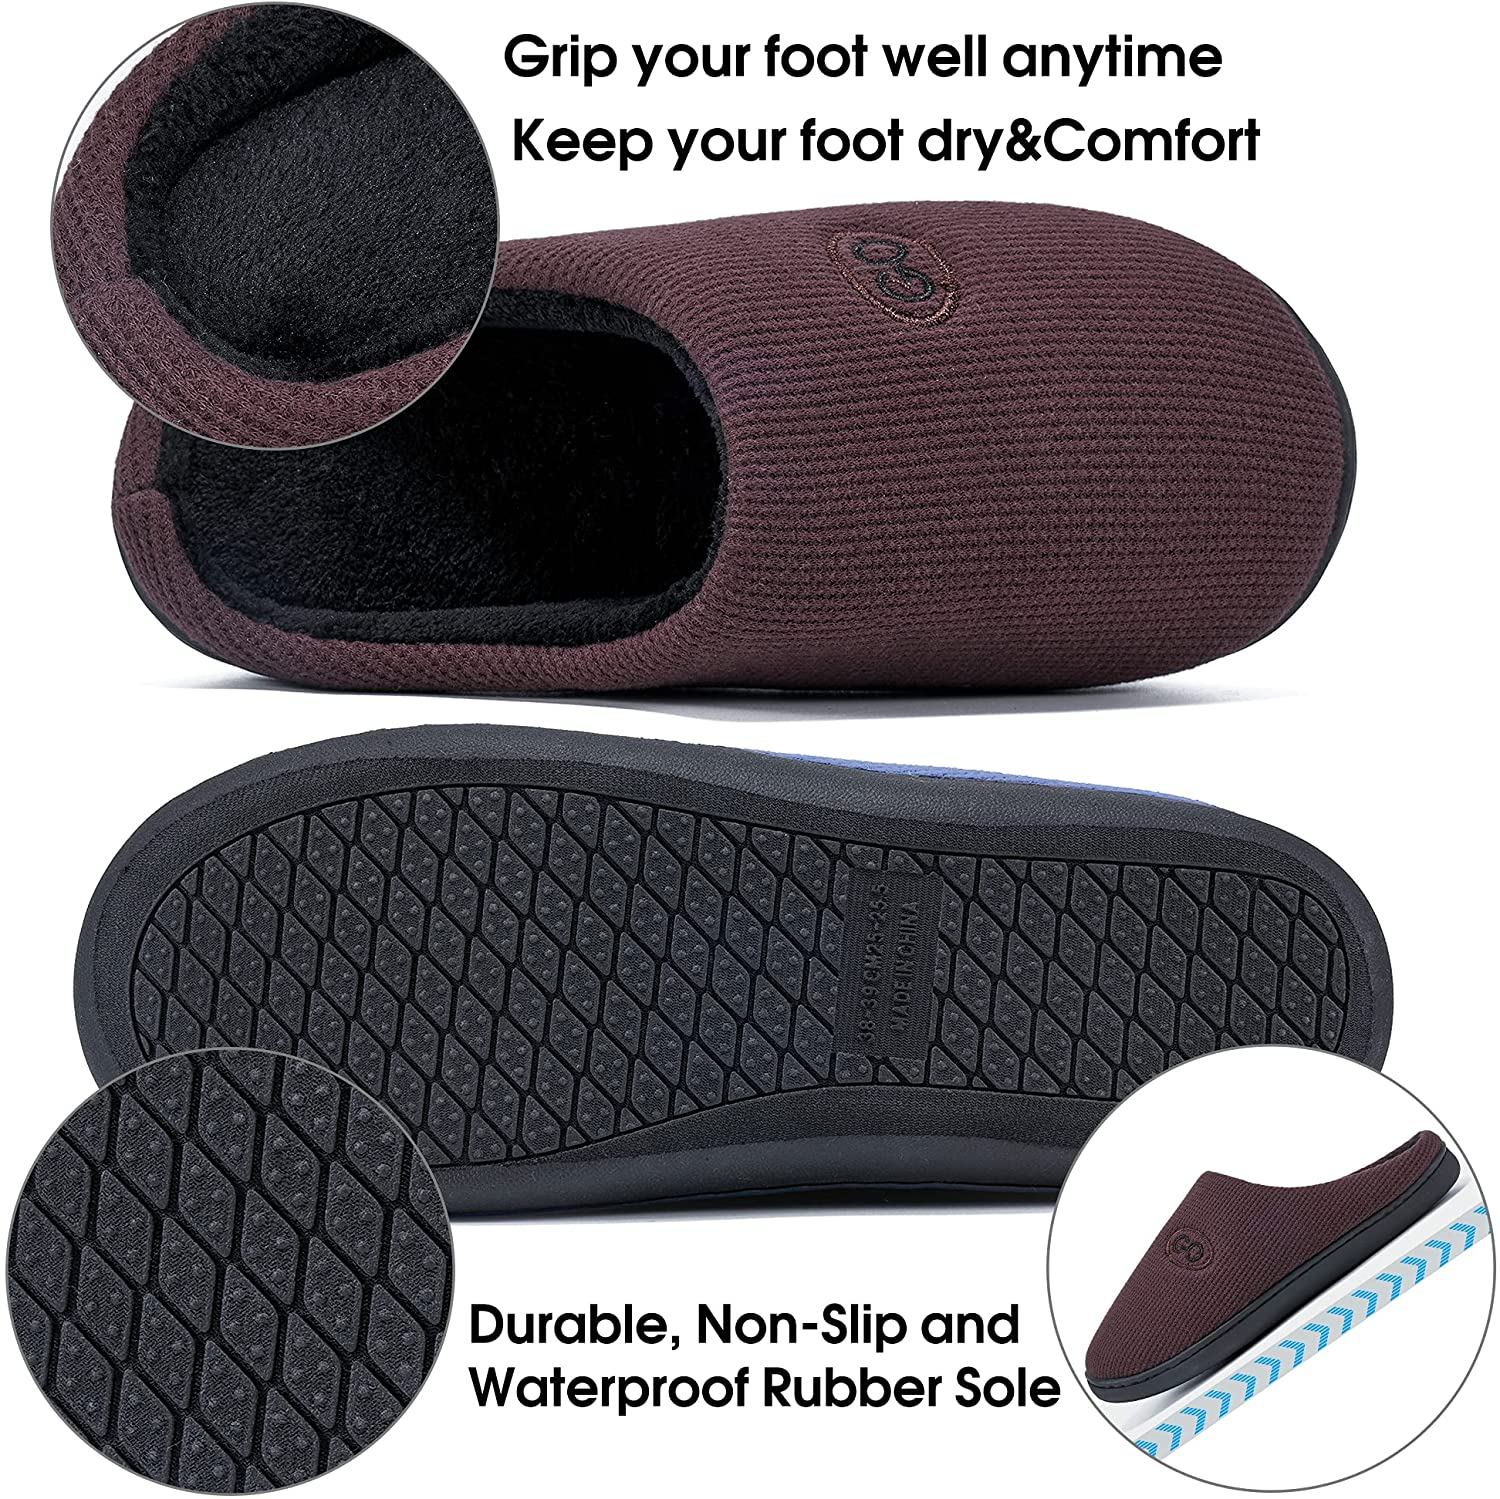 Men Slippers Memory Foam House Shoes Indoor Outdoor Non Slip Comfortable Bedroom Slipper Closed Toe Hand Free Shoes